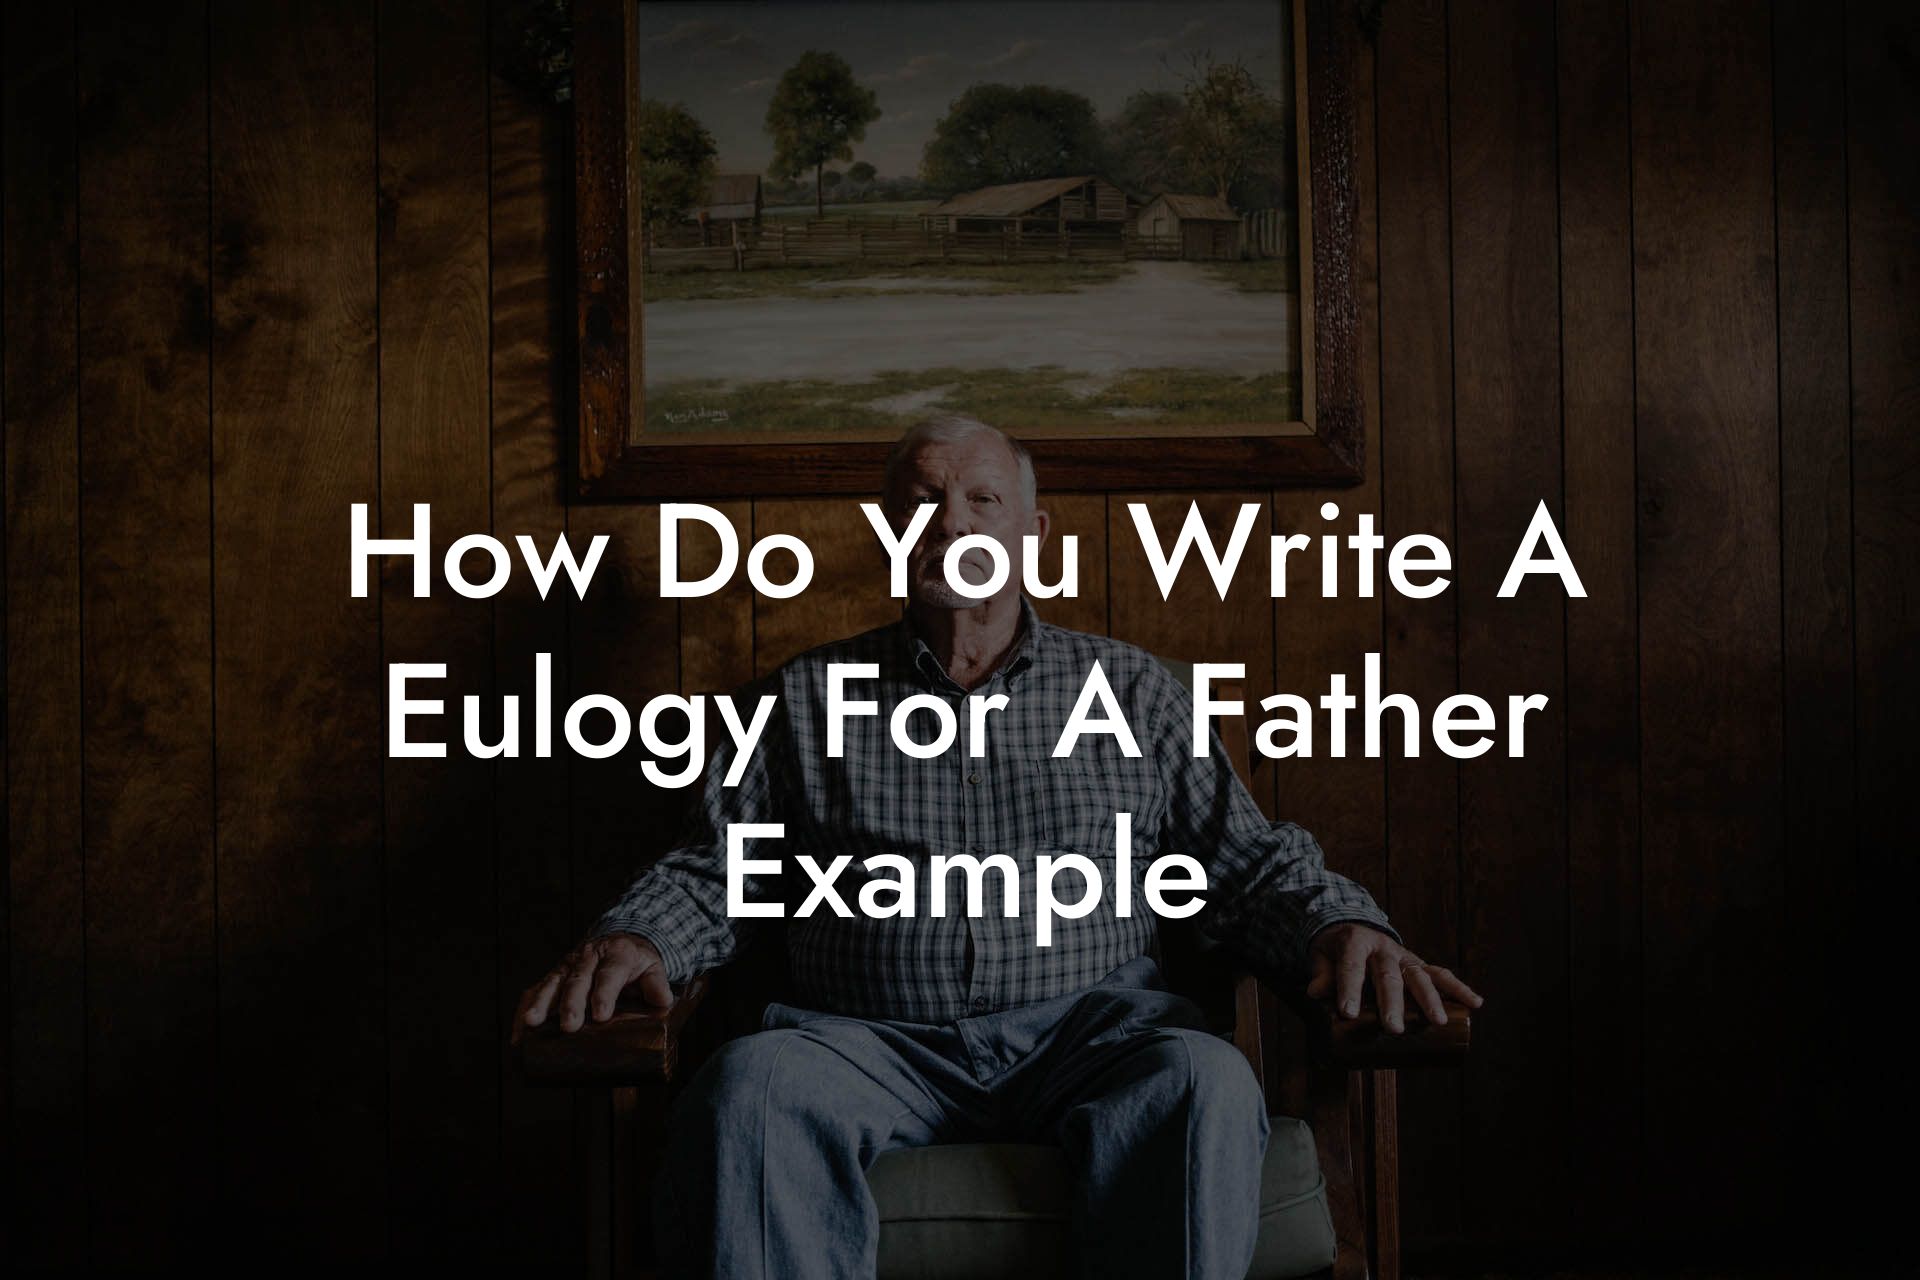 How Do You Write A Eulogy For A Father Example